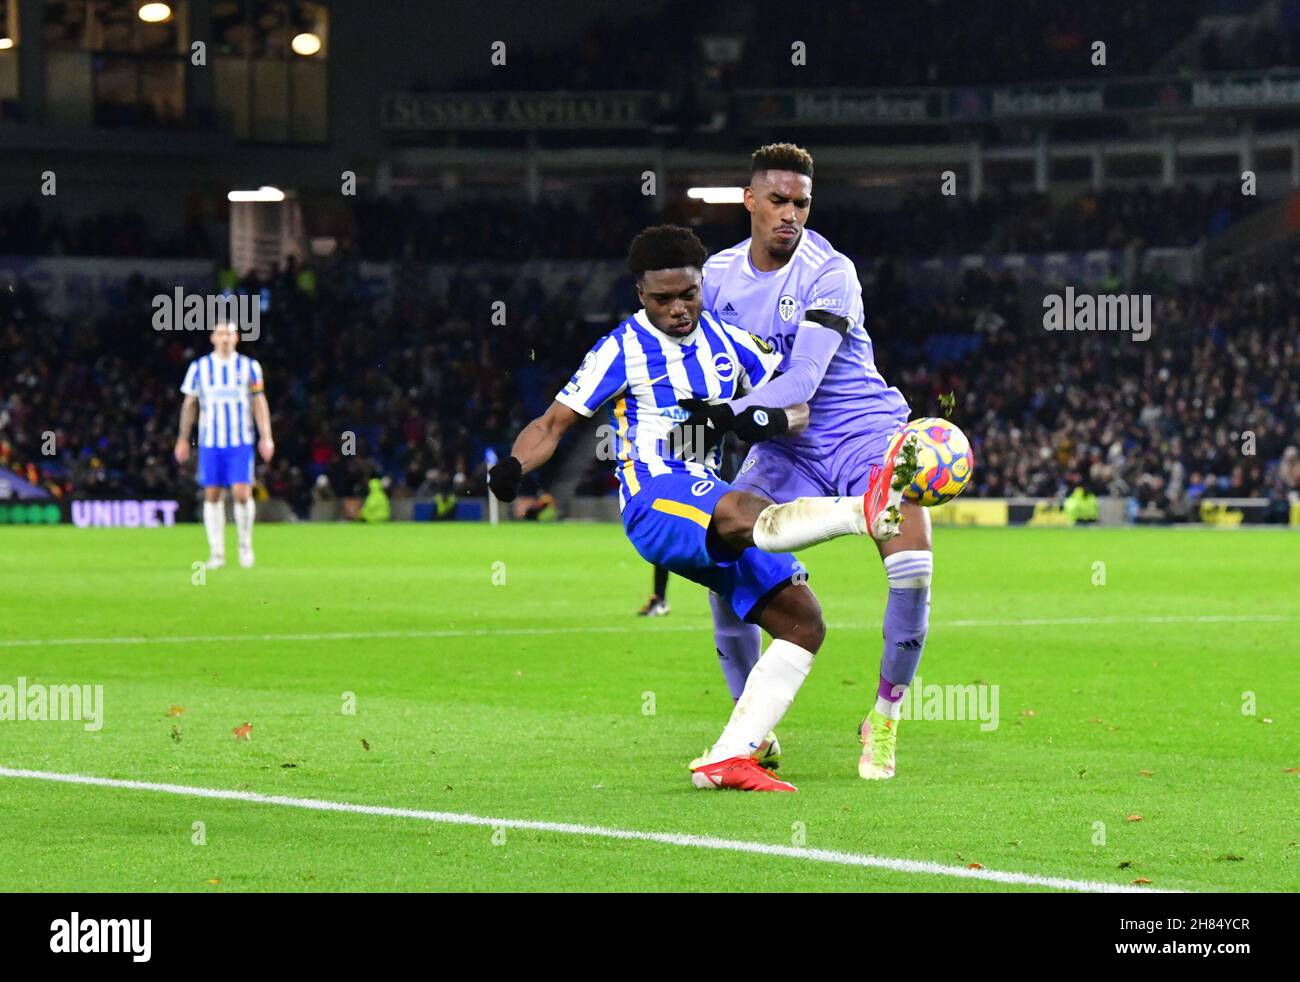 Brighton, UK. 27th Nov, 2021. Tariq Lamptey of Brighton and Hove Albion manages to cross the ball into the box under pressure from Junior Firpo of Leeds United during the Premier League match between Brighton & Hove Albion and Leeds United at The Amex on November 27th 2021 in Brighton, England. (Photo by Jeff Mood/phcimages.com) Credit: PHC Images/Alamy Live News Stock Photo